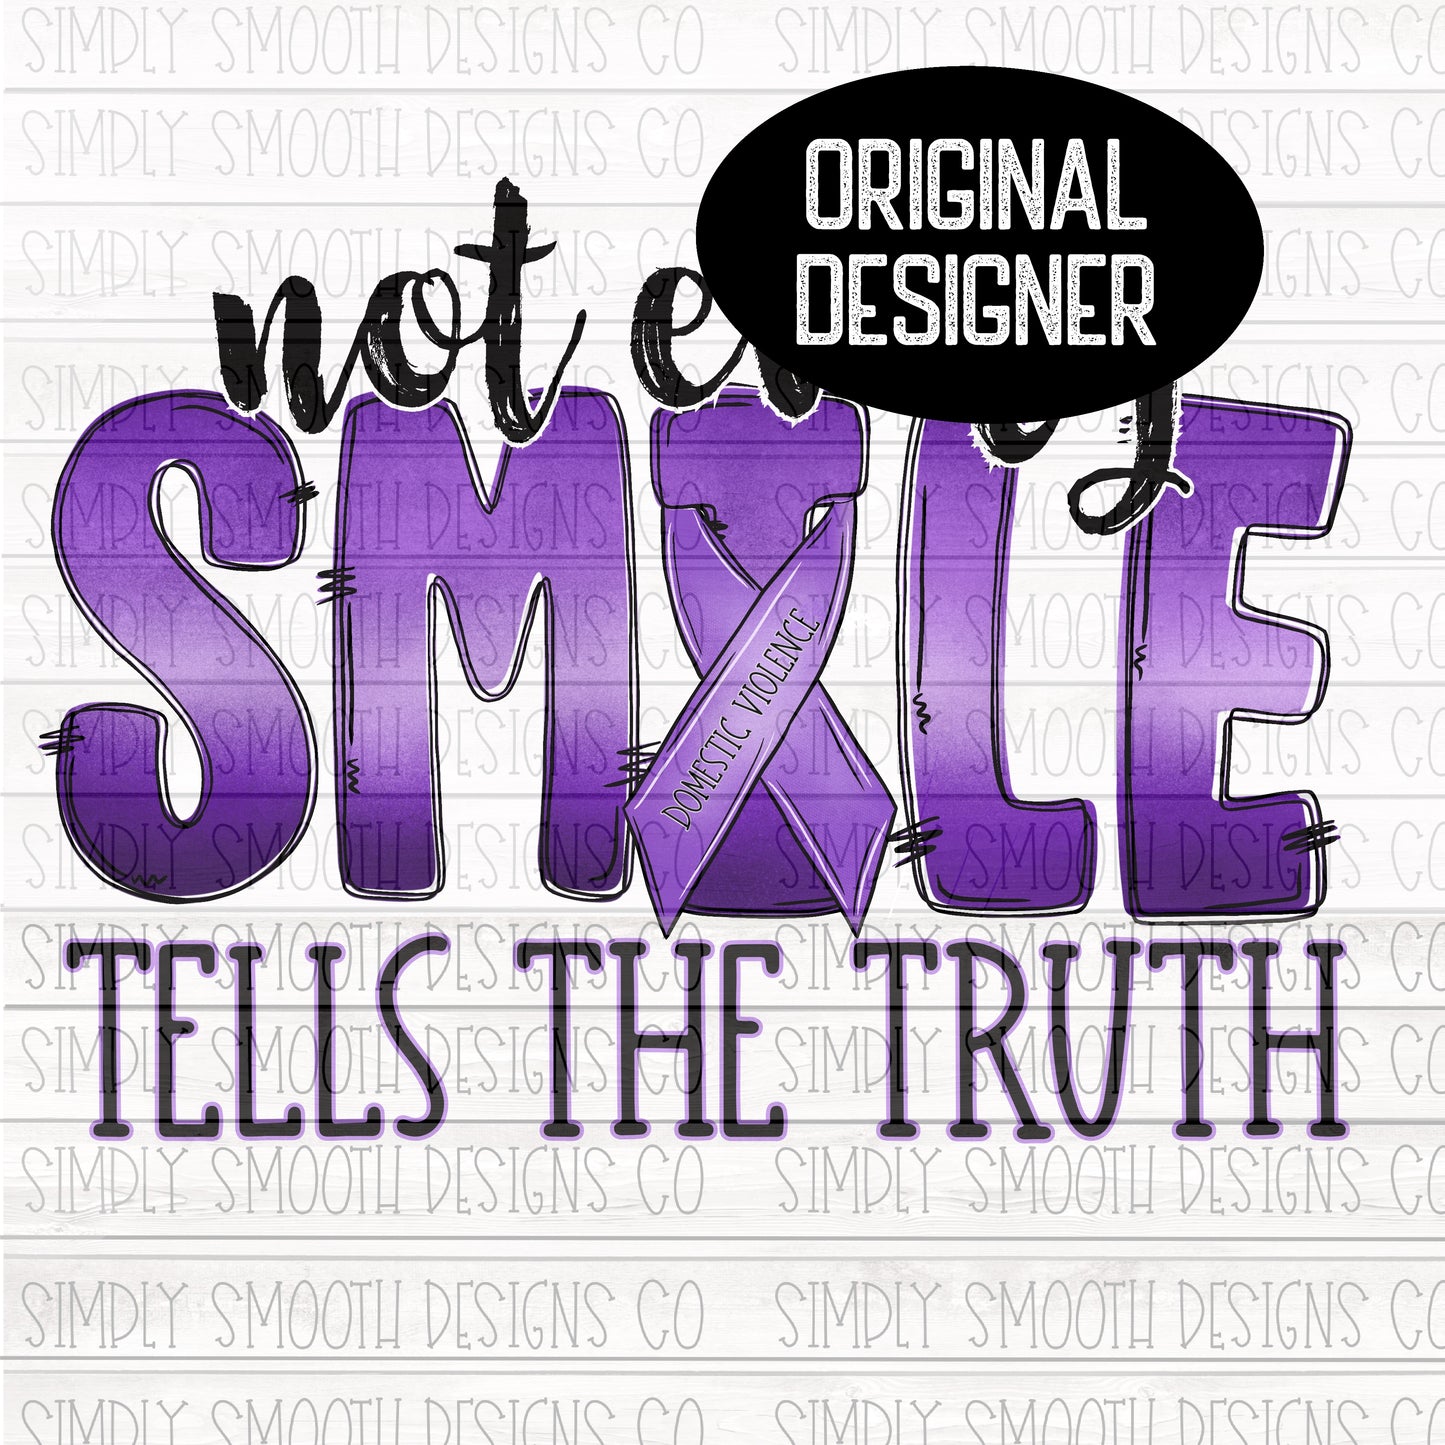 Not ever smile tells the truth domestic violence awareness